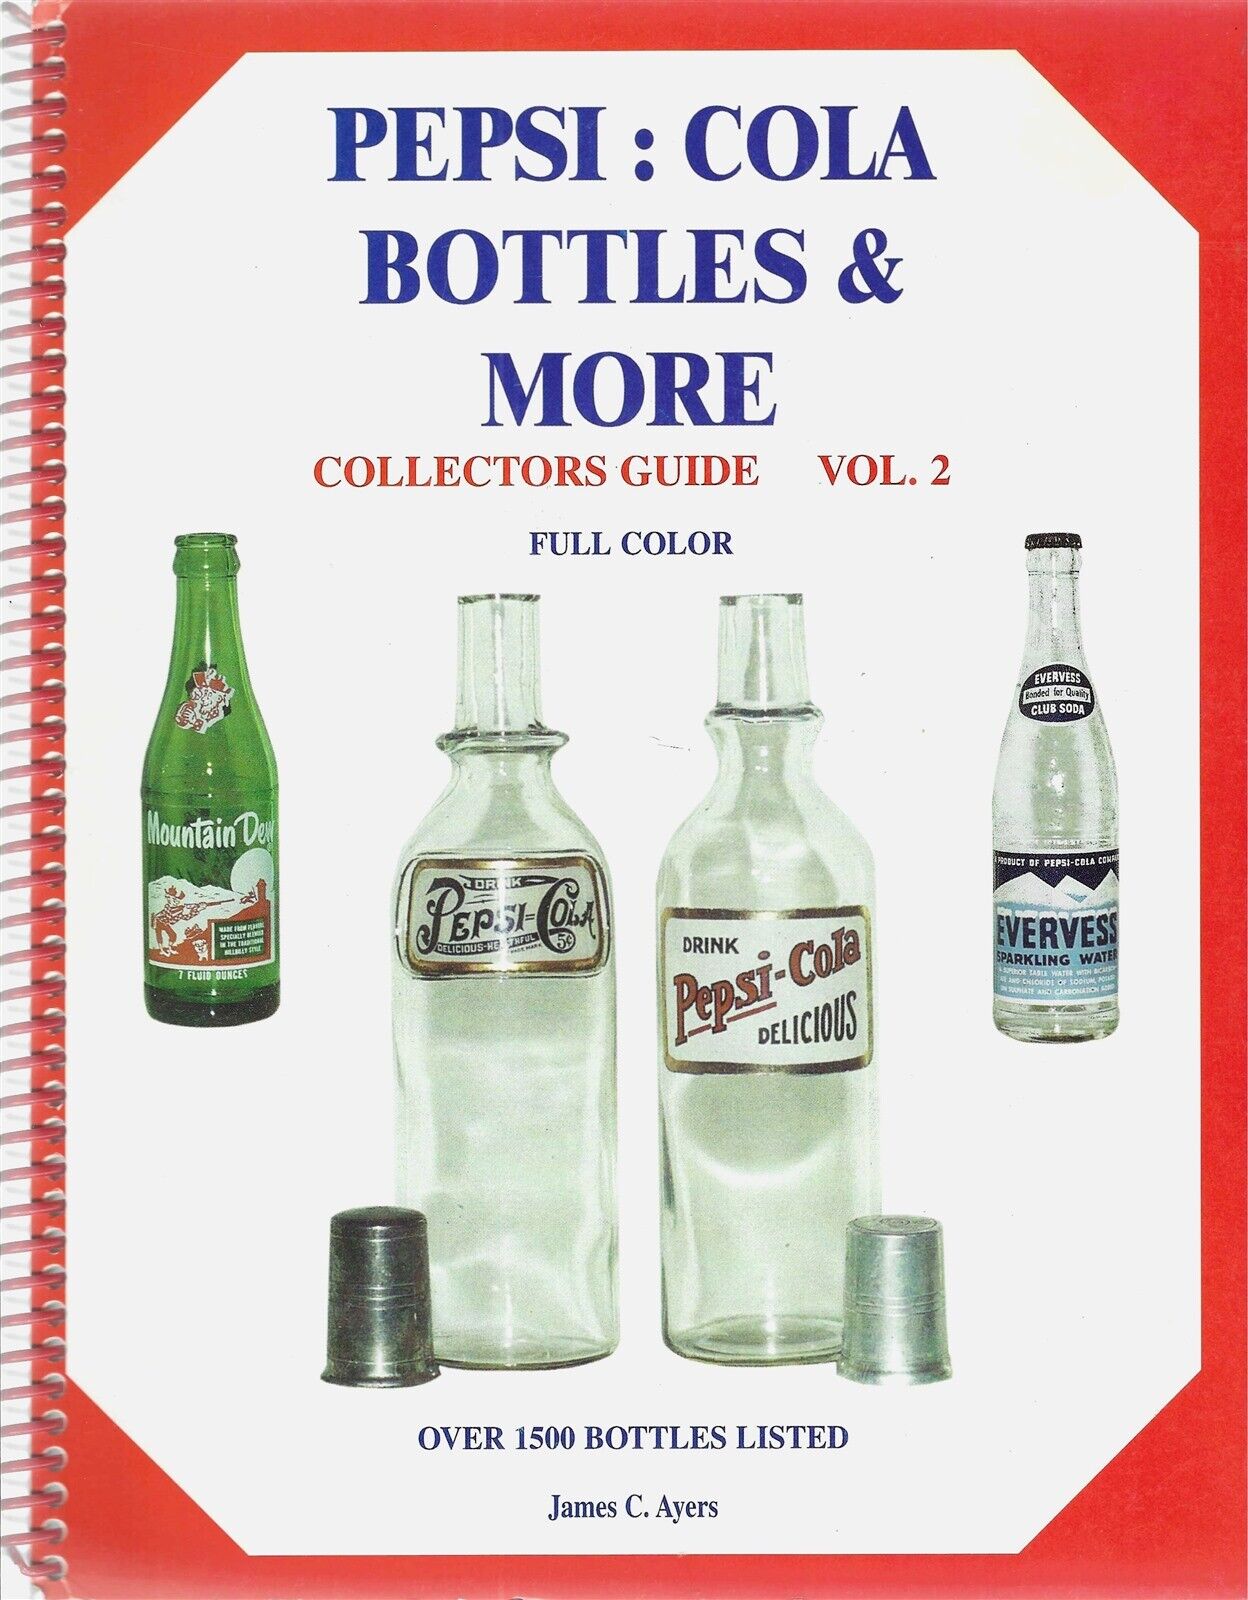 Pepsi-Cola Bottles & More Collectors Guide, Vol. 2 (with Correction Sheet) - VG